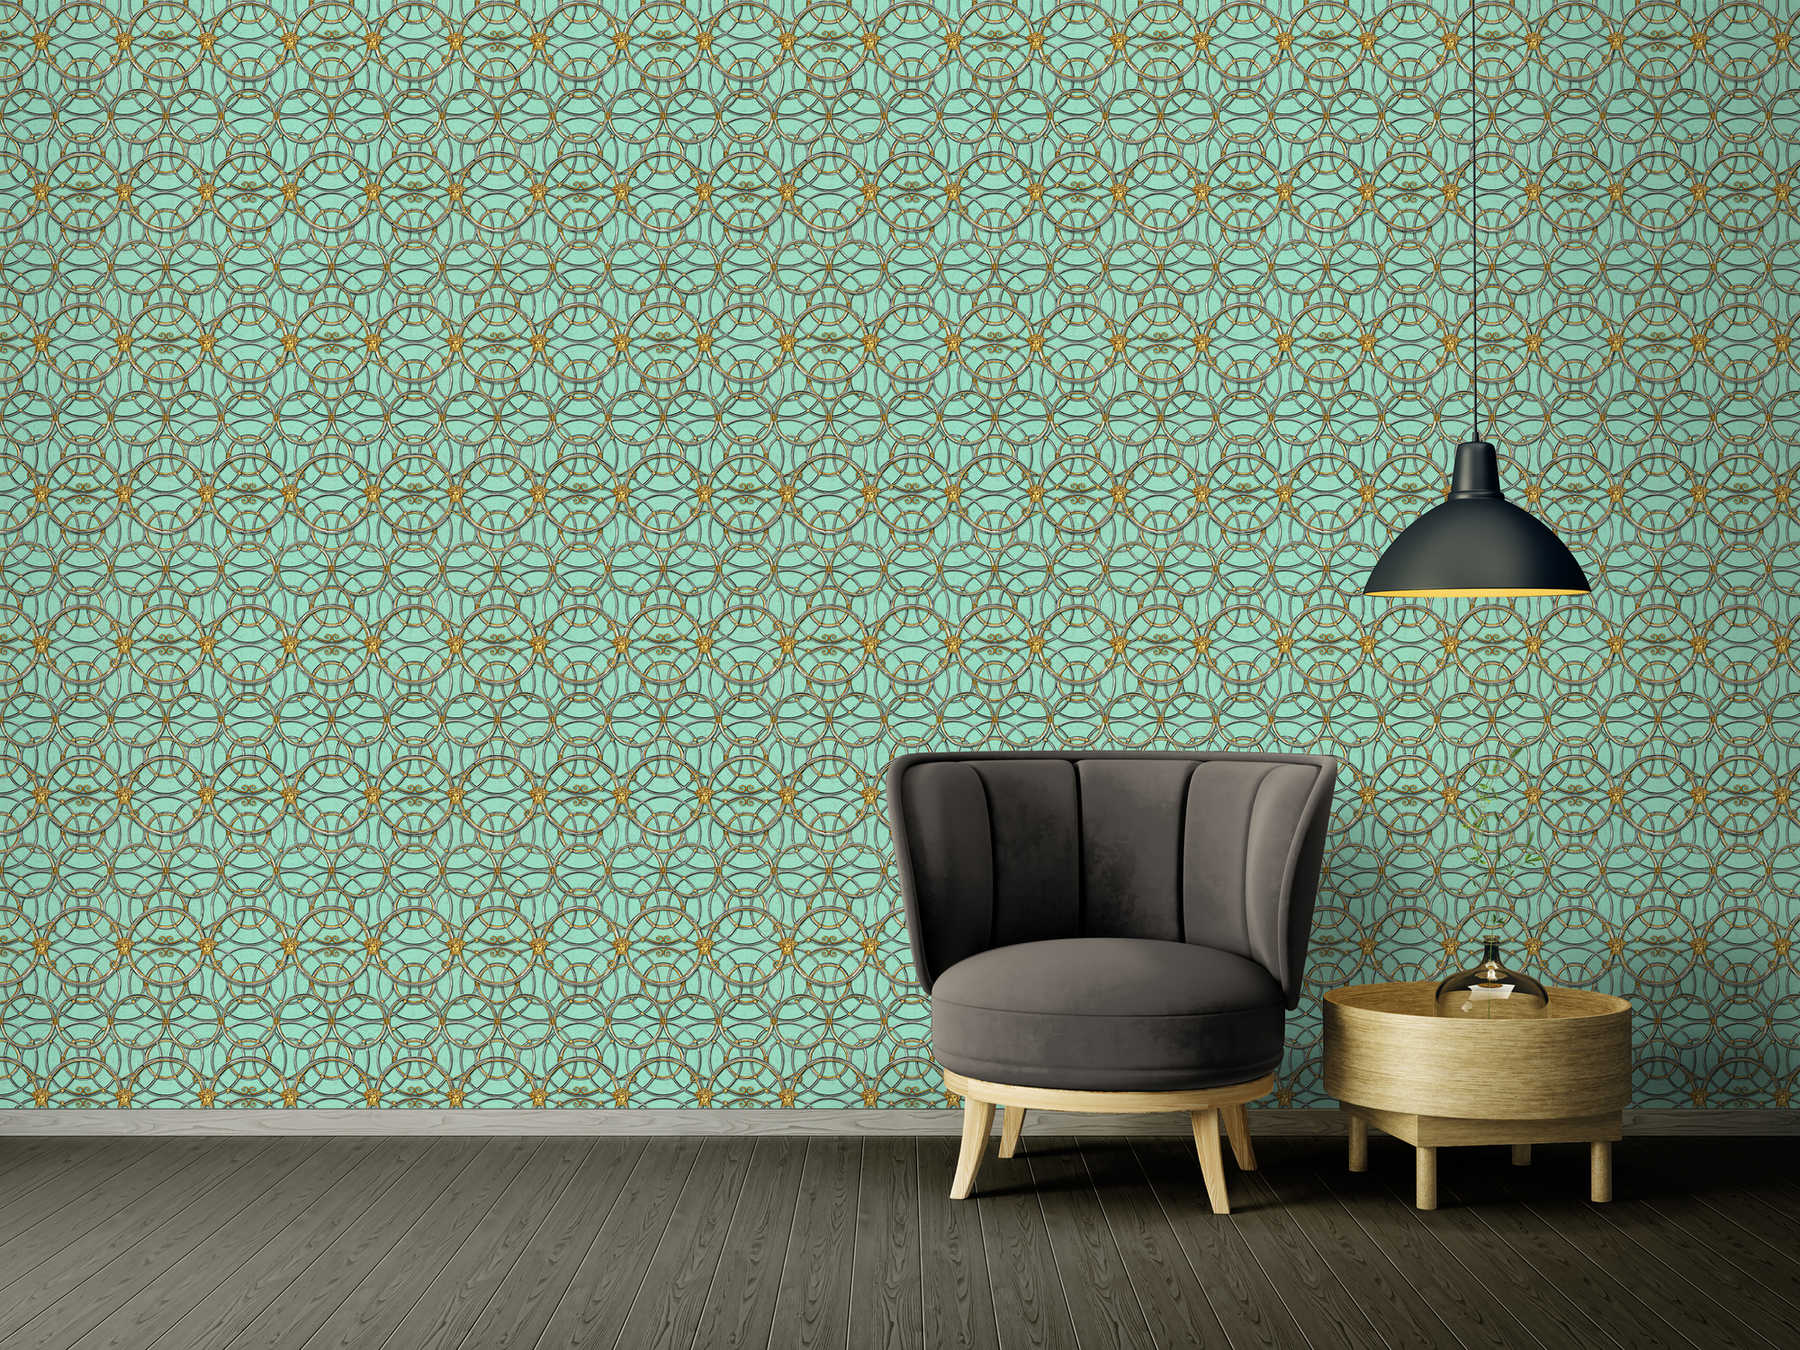             VERSACE Home wallpaper circle pattern and Medusa - green, gold, silver
        